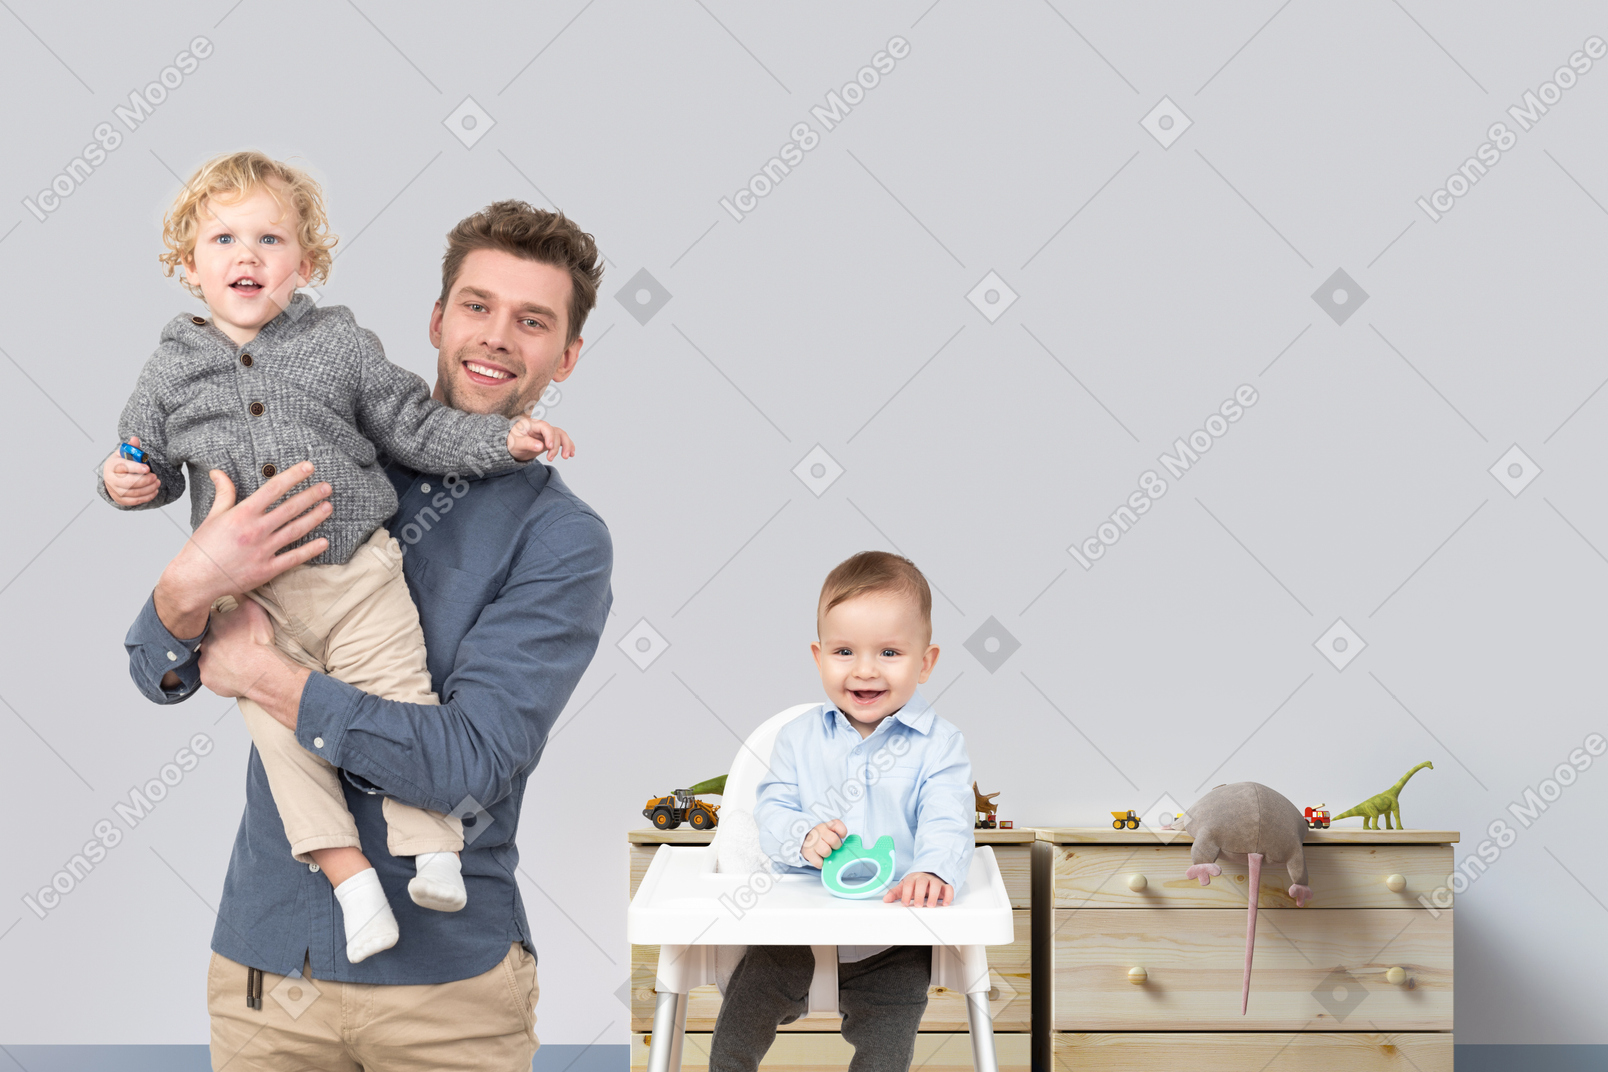 Man holding a baby in his arms next to a baby in highchair